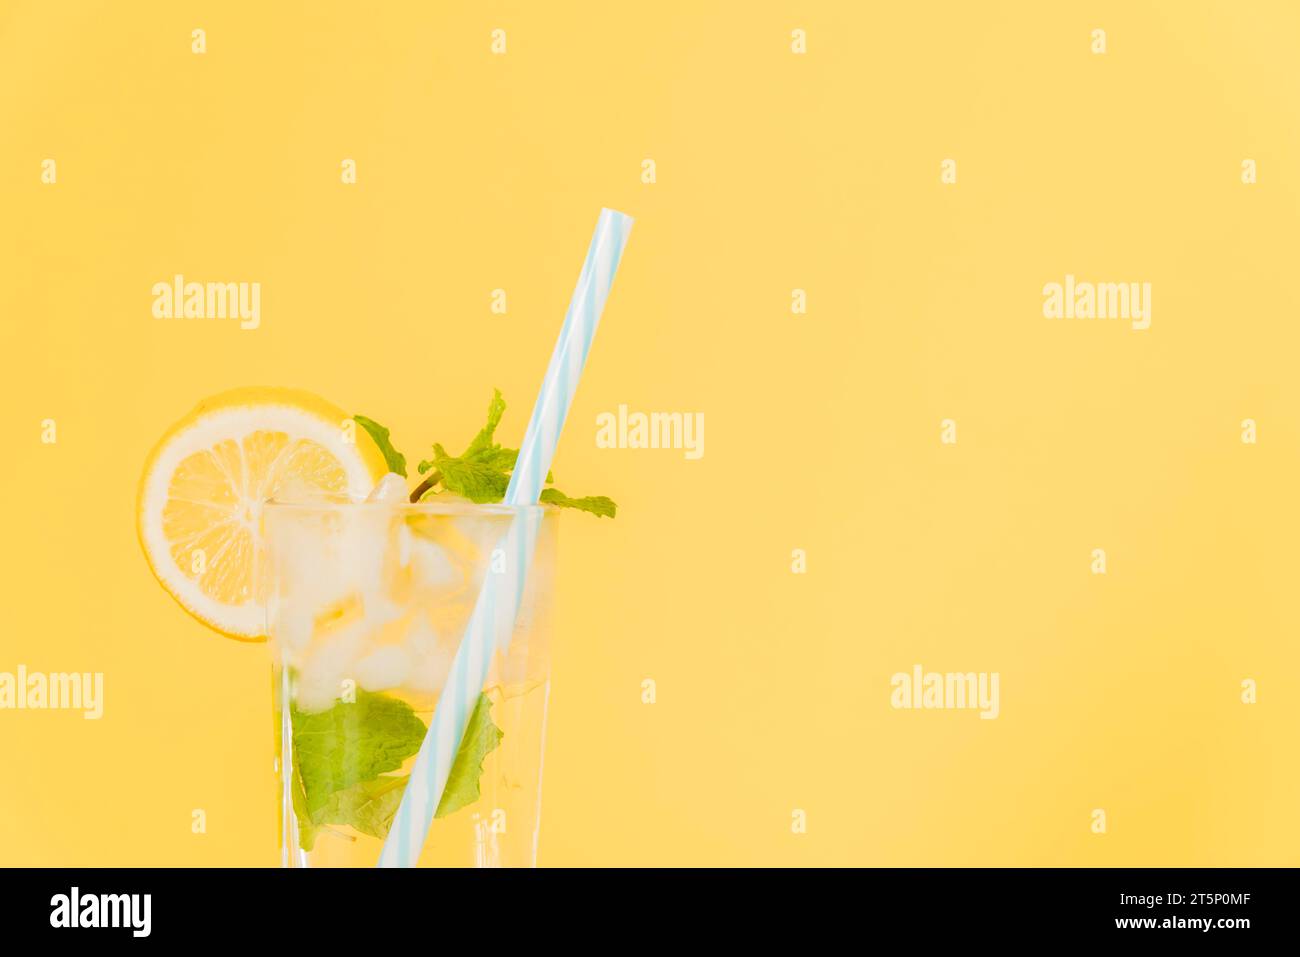 Lemon cocktail with plastic straw yellow background Stock Photo